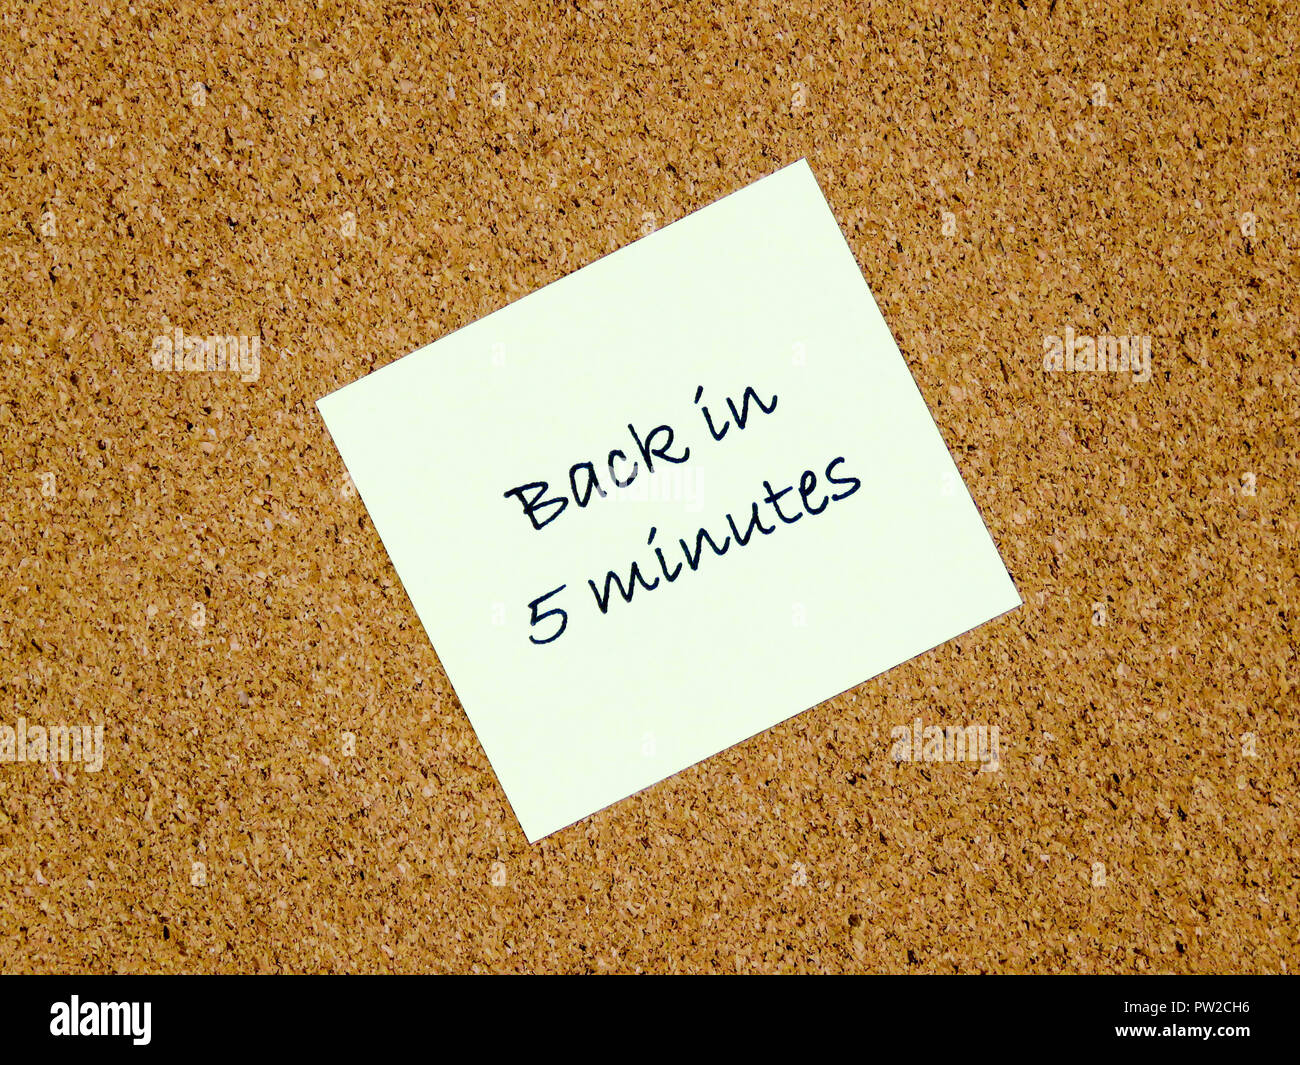 A yellow sticky note with back in 5 minutes written on it on a cork board background Stock Photo